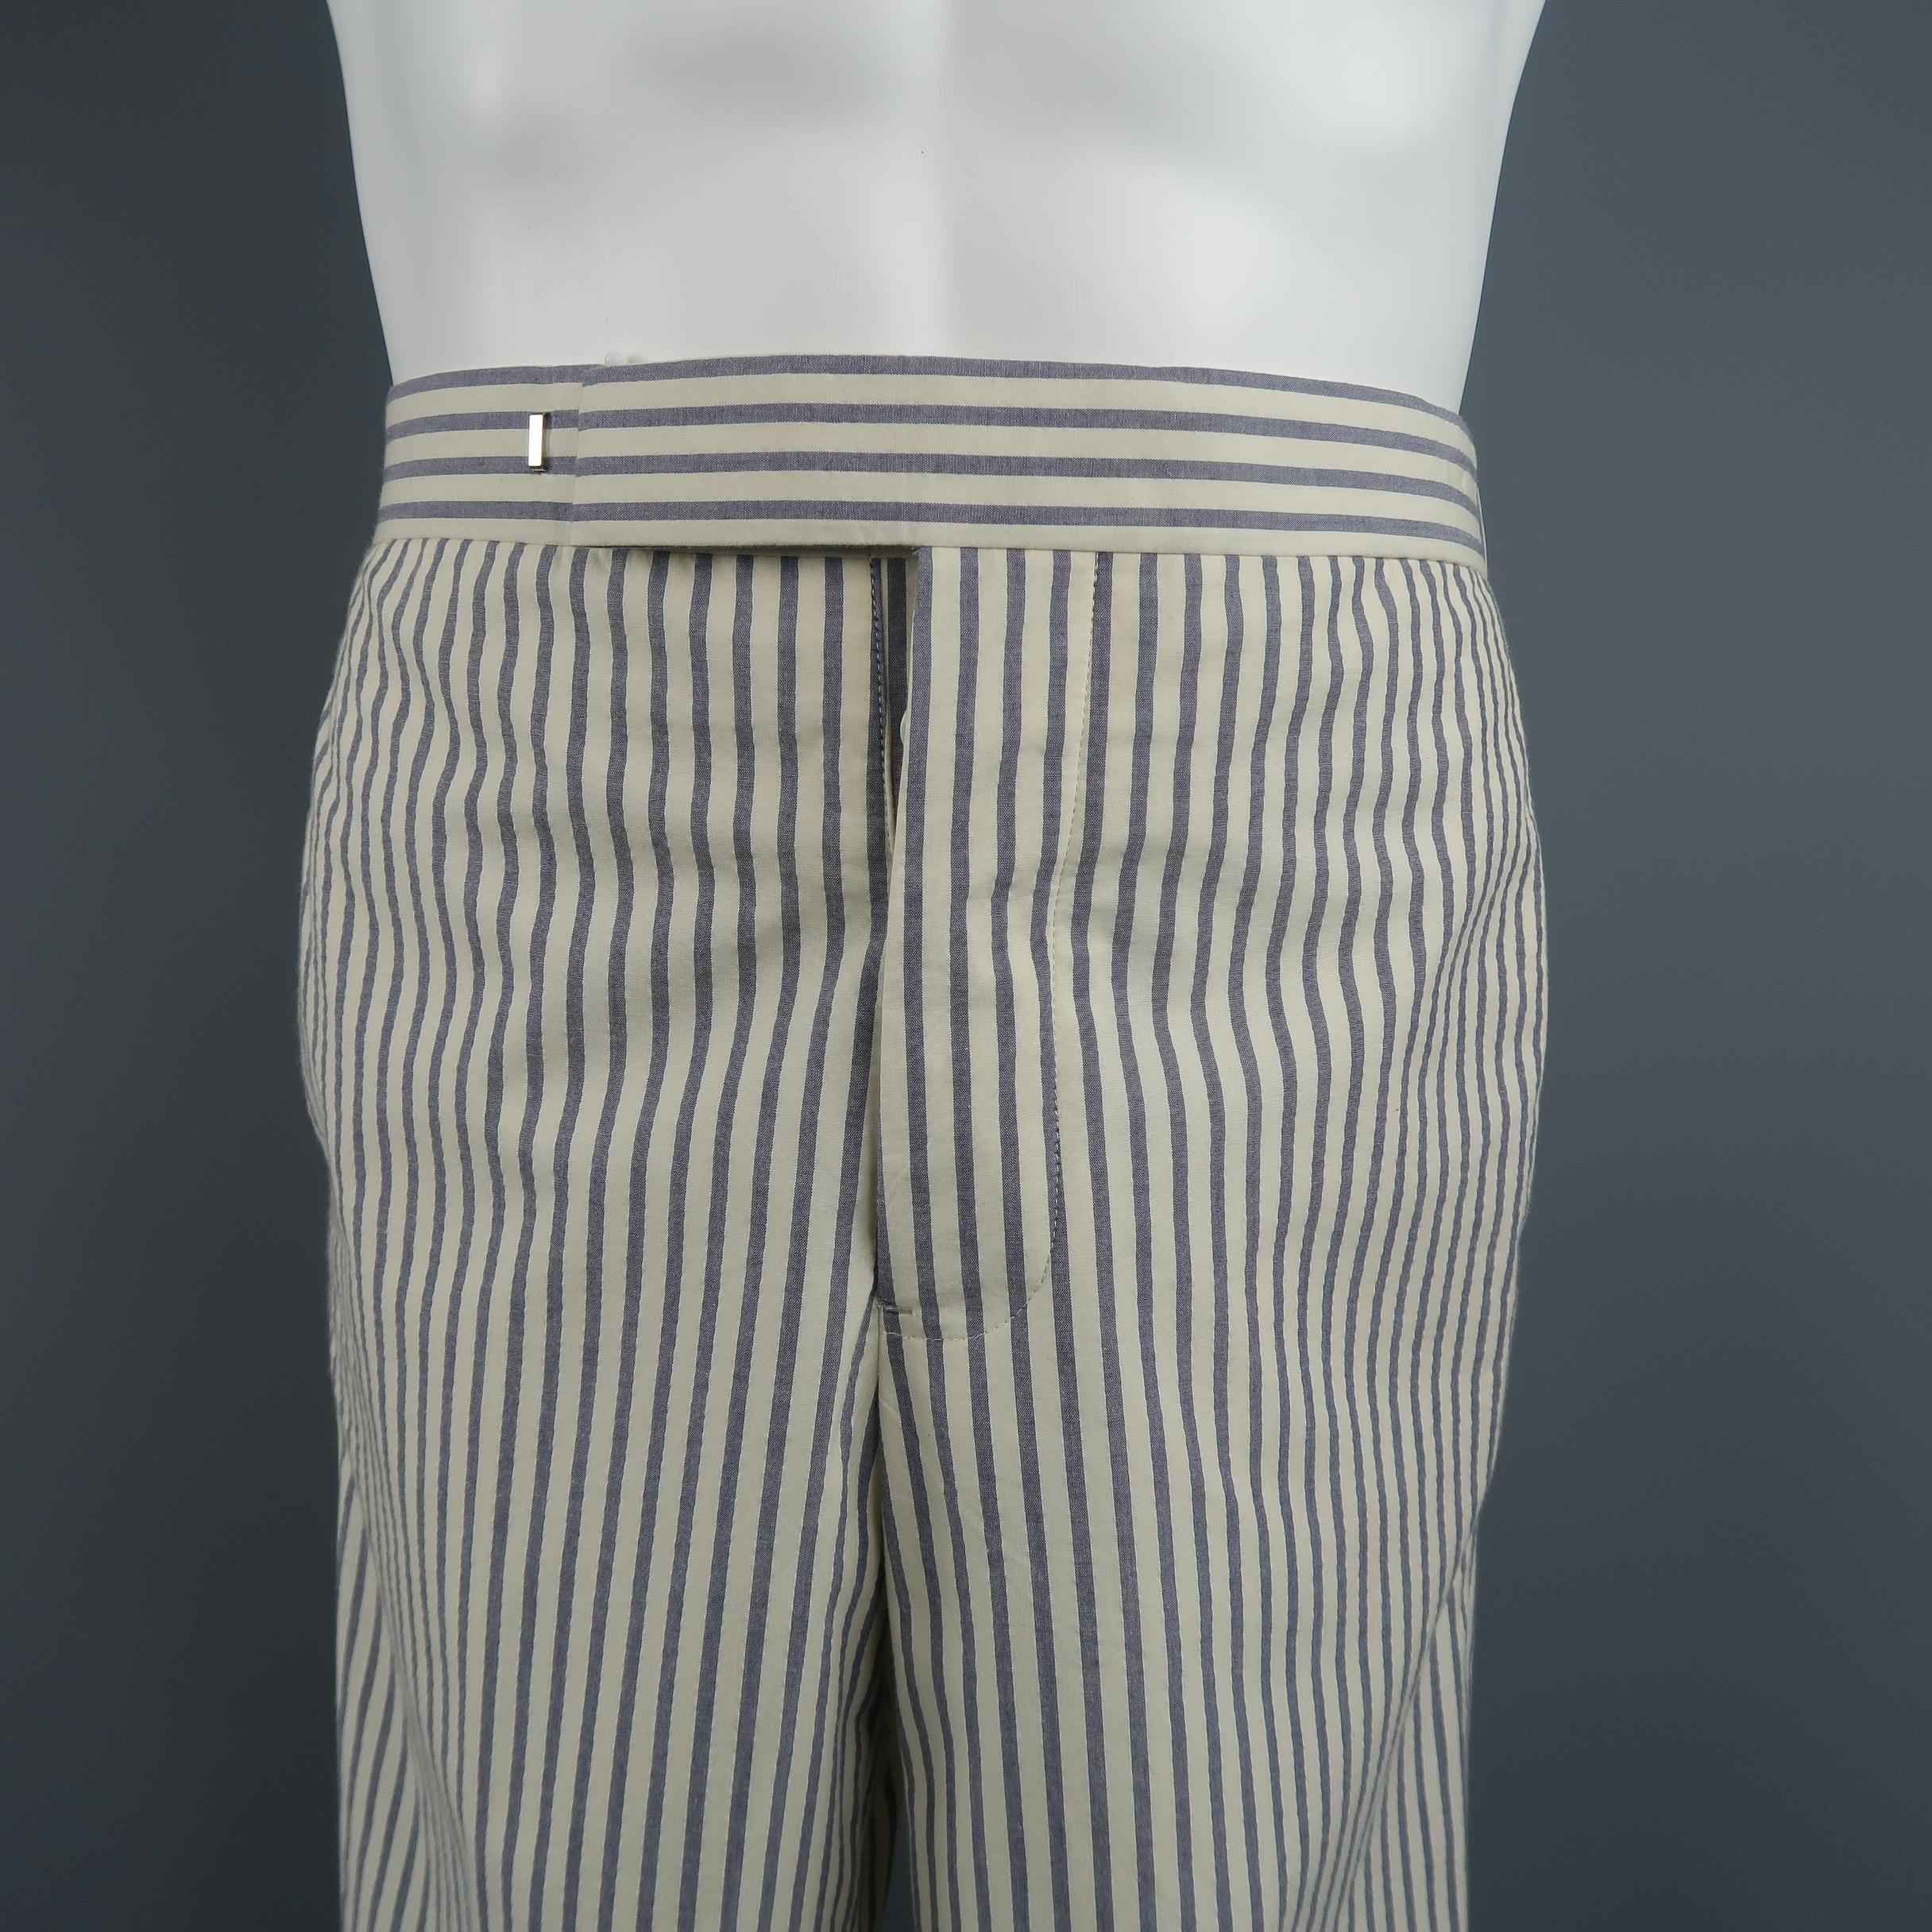 Black Fleece  pants, come in light weight stripe cotton, with a classic tailoring closure and cuffed hem.
 
Excellent Pre-Owned Condition.
Marked: BB0
 
Measurements:
 
Waist: 30 in.
Rise: 11 in.
Inseam: 29 in.